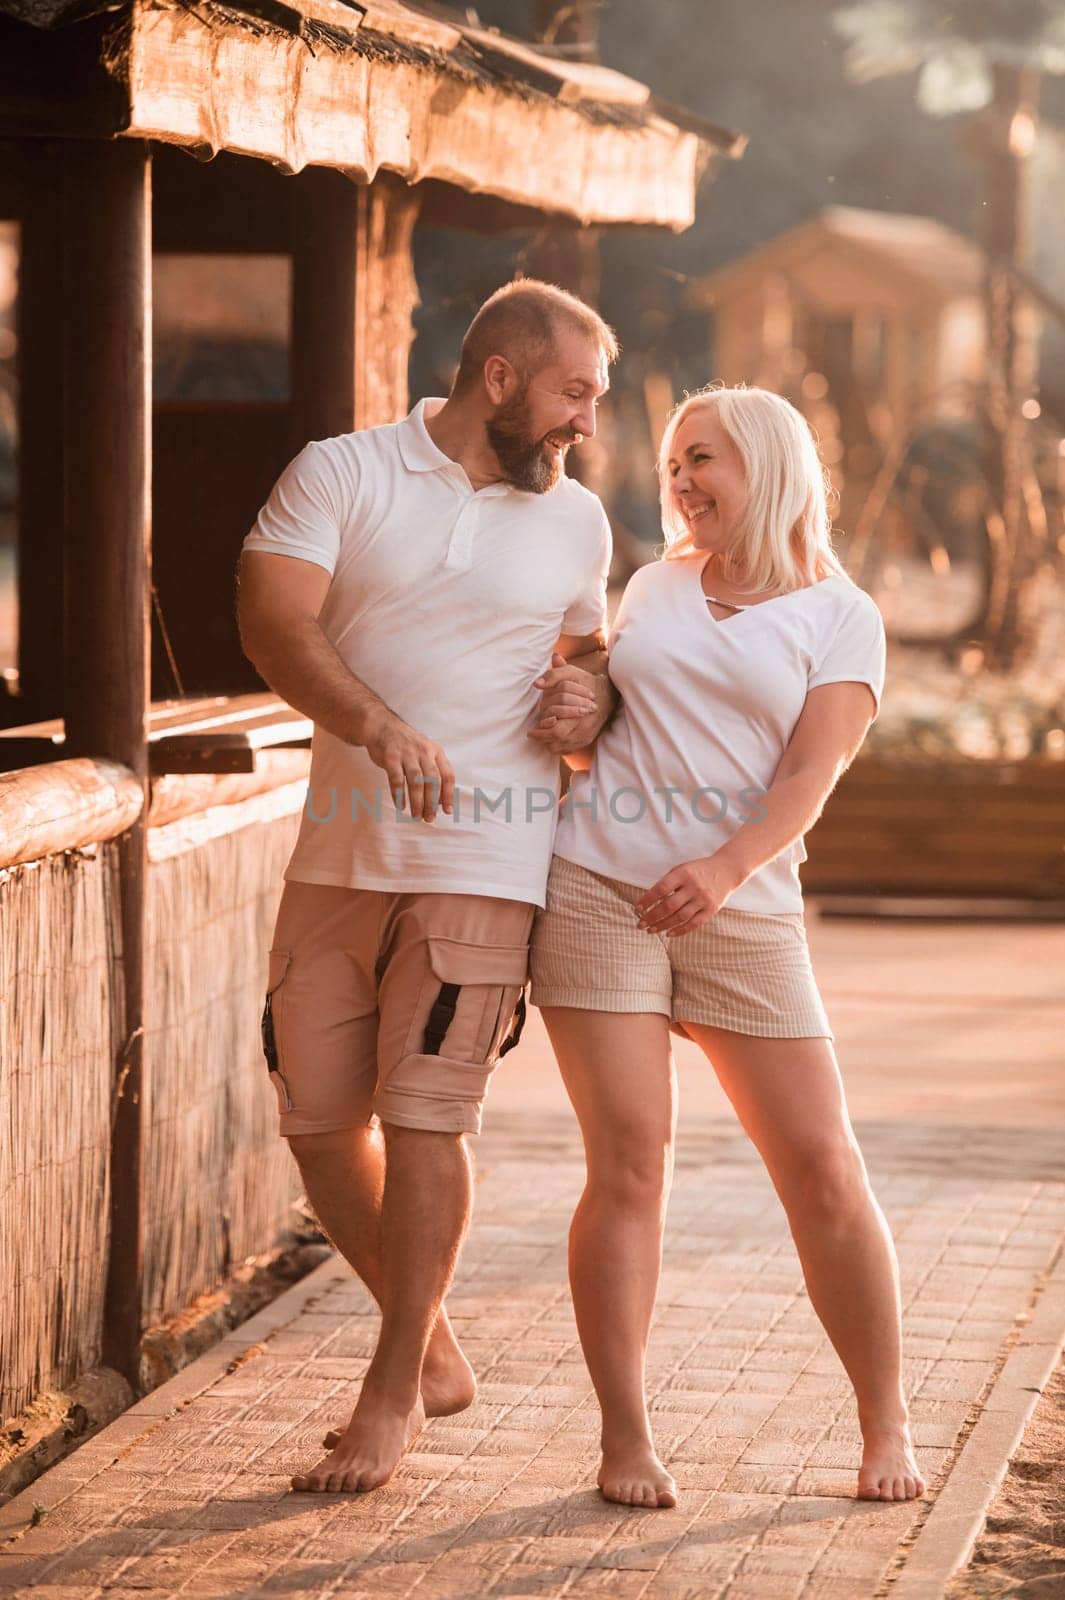 A happy married couple in shorts and T-shirts walks down the street at sunset in summer by Lobachad